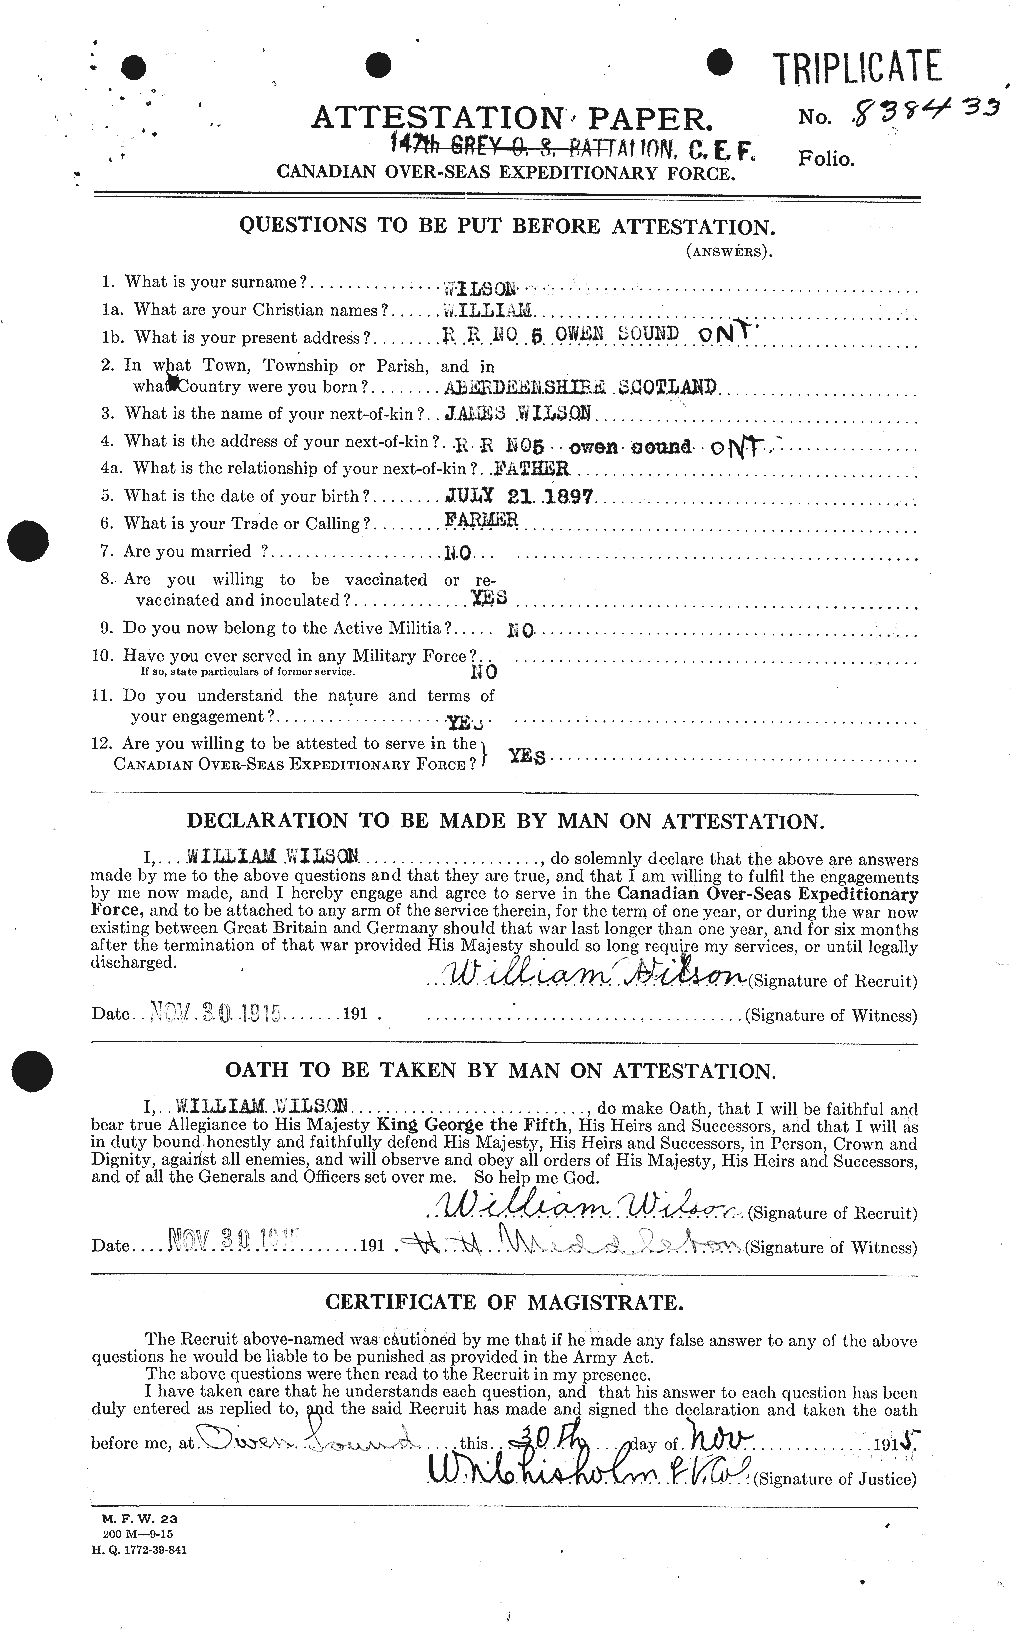 Personnel Records of the First World War - CEF 681832a